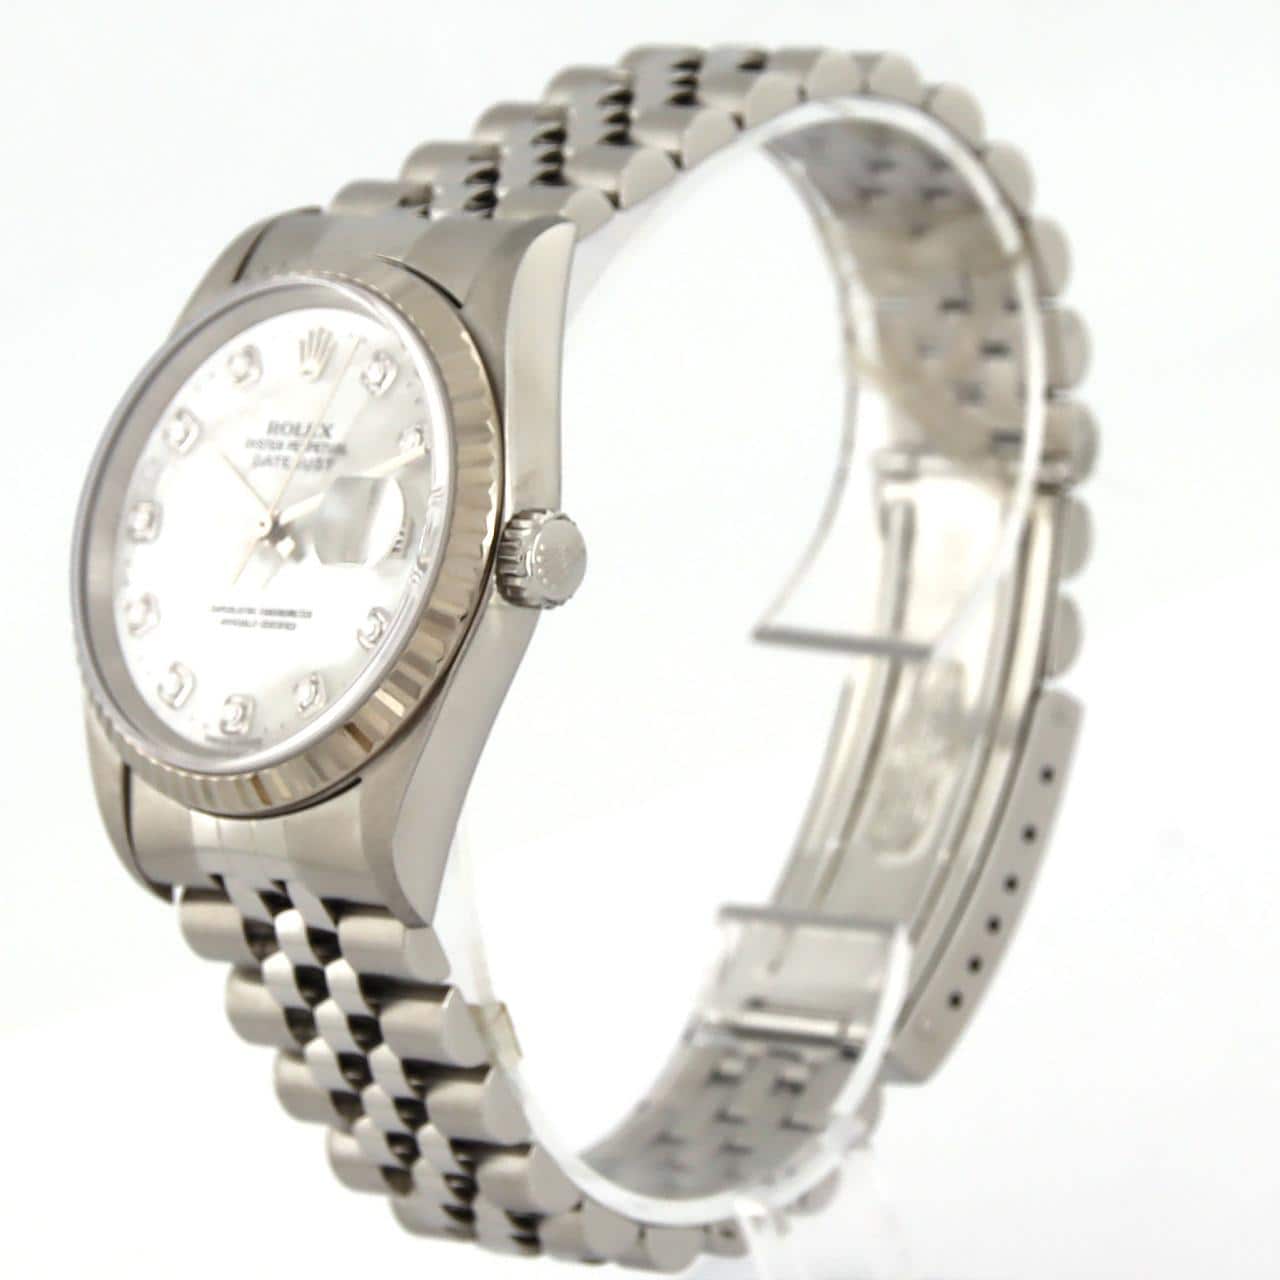 ROLEX Datejust 16234NG SSxWG自動上弦K 編號